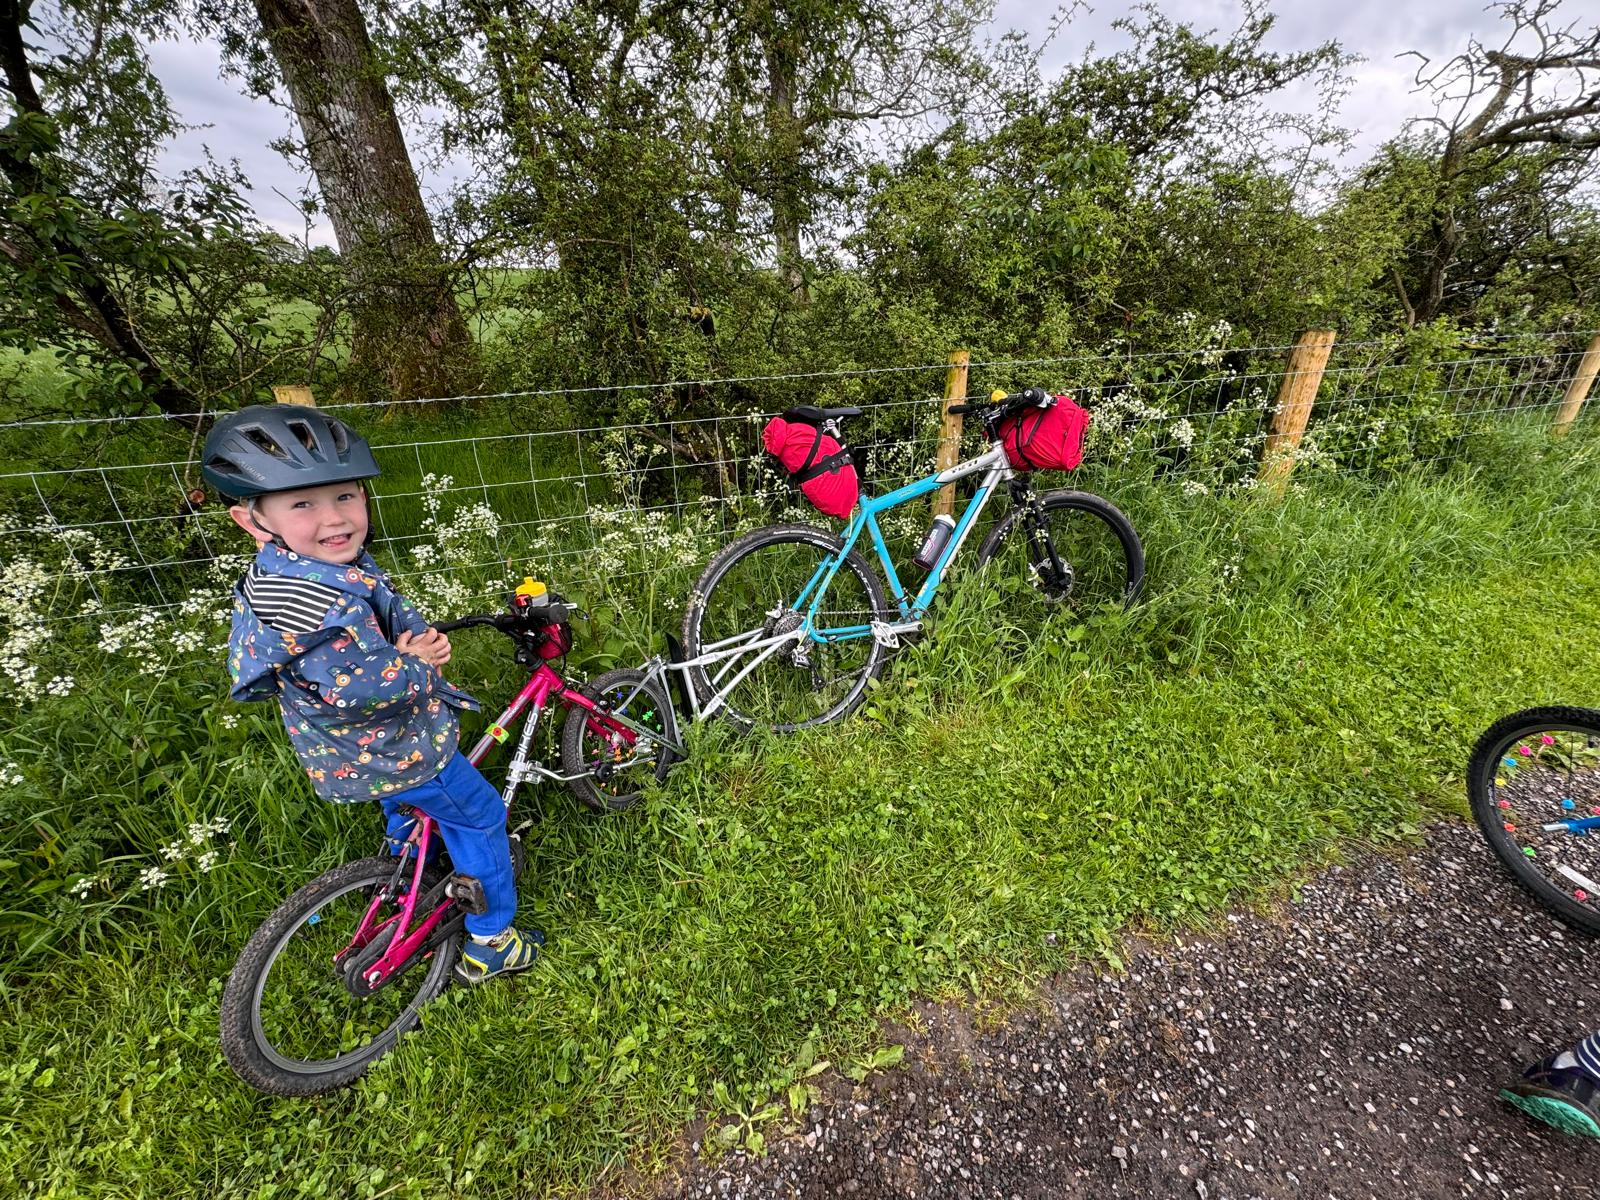 Boy smiling on his follow me tandem bike on a grassy verge